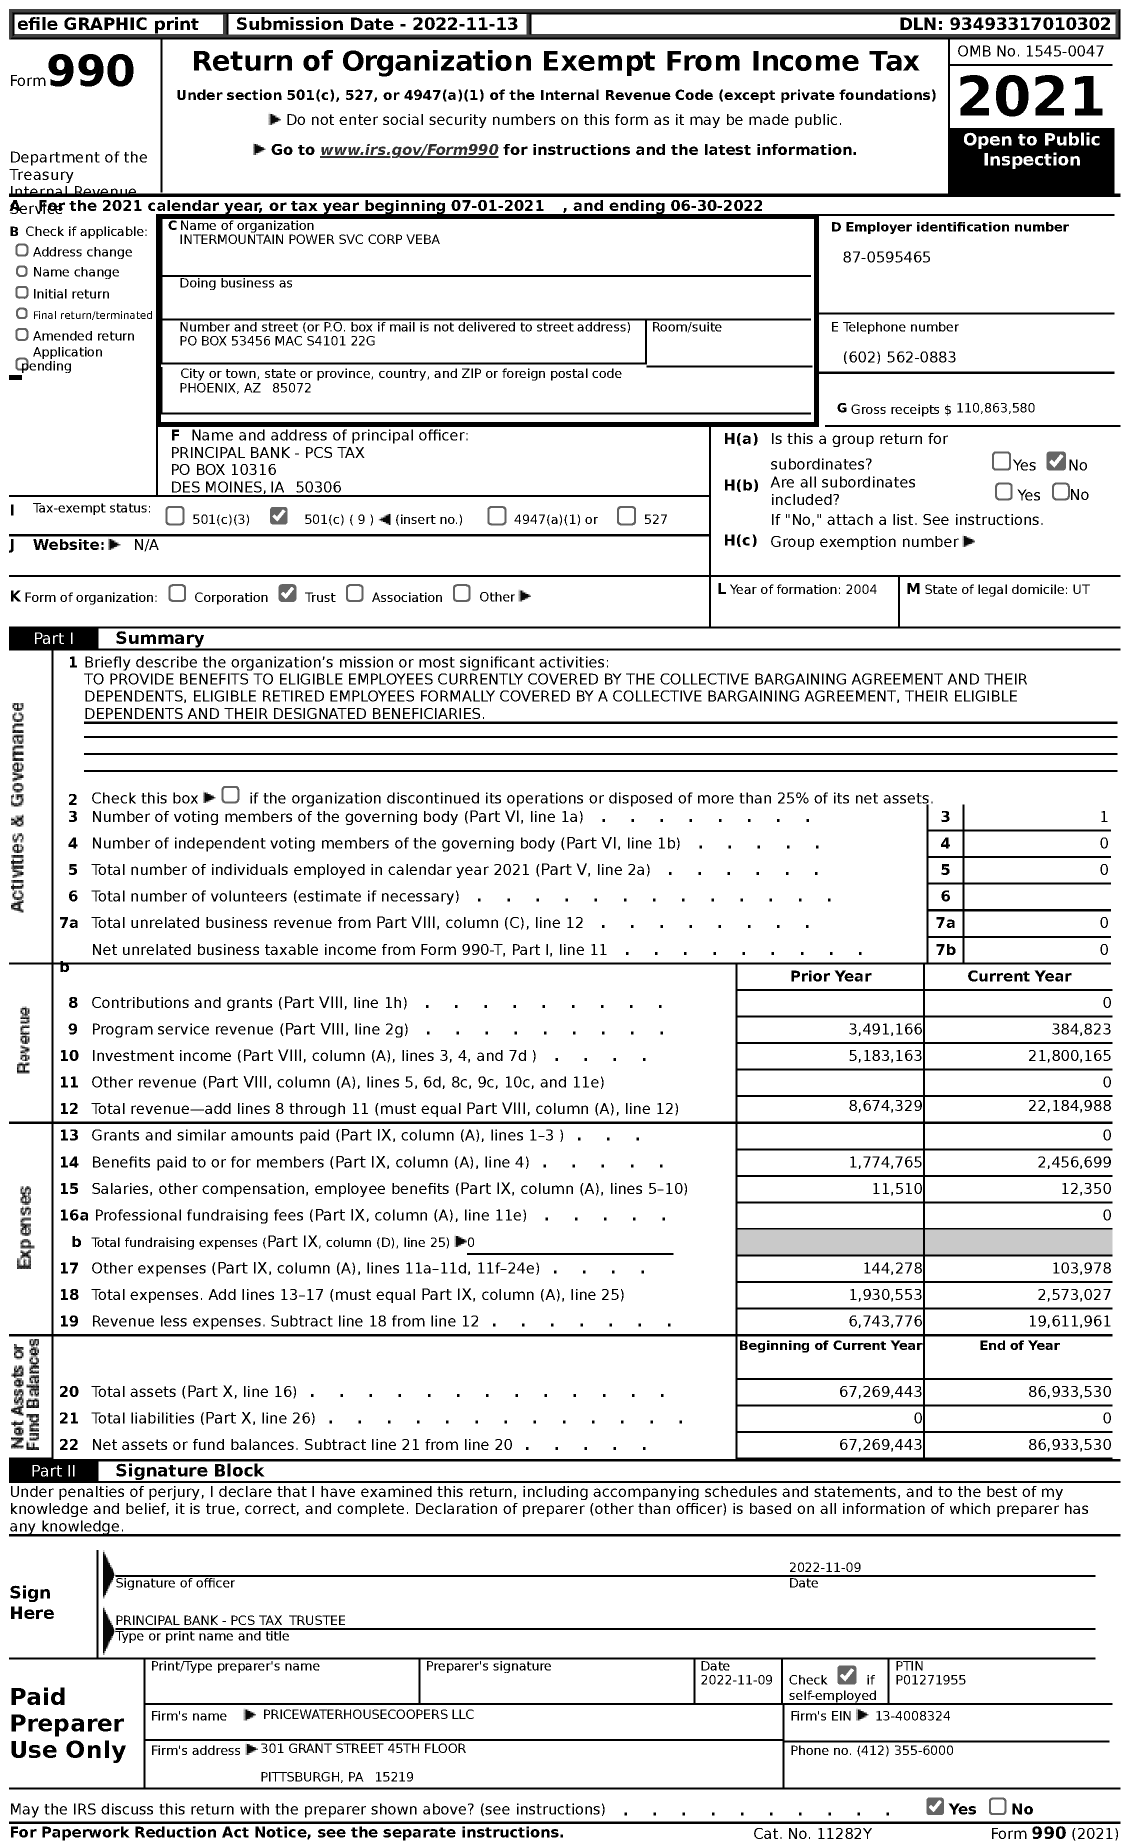 Image of first page of 2021 Form 990 for Intermountain Power Service Corp Veba